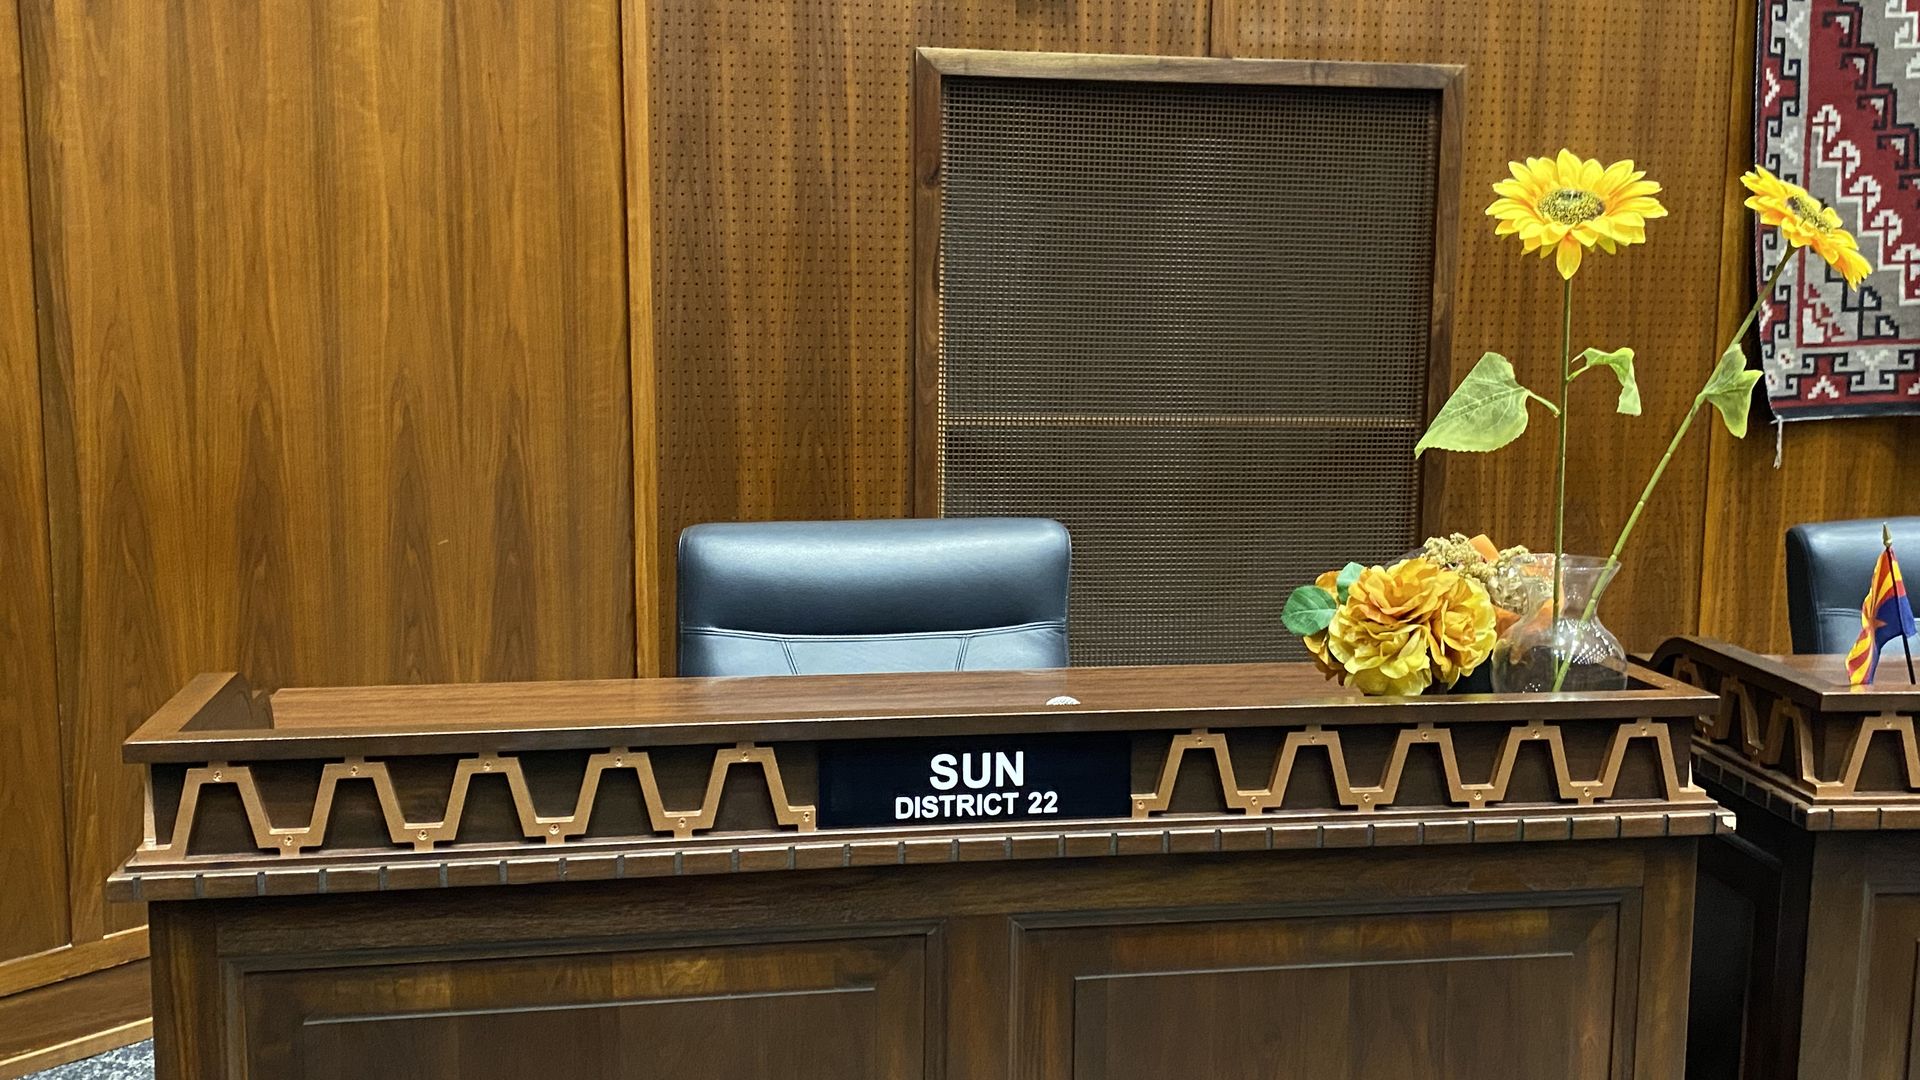 An empty desk with sunflowers on it and a nameplate that reads Sun District 22.